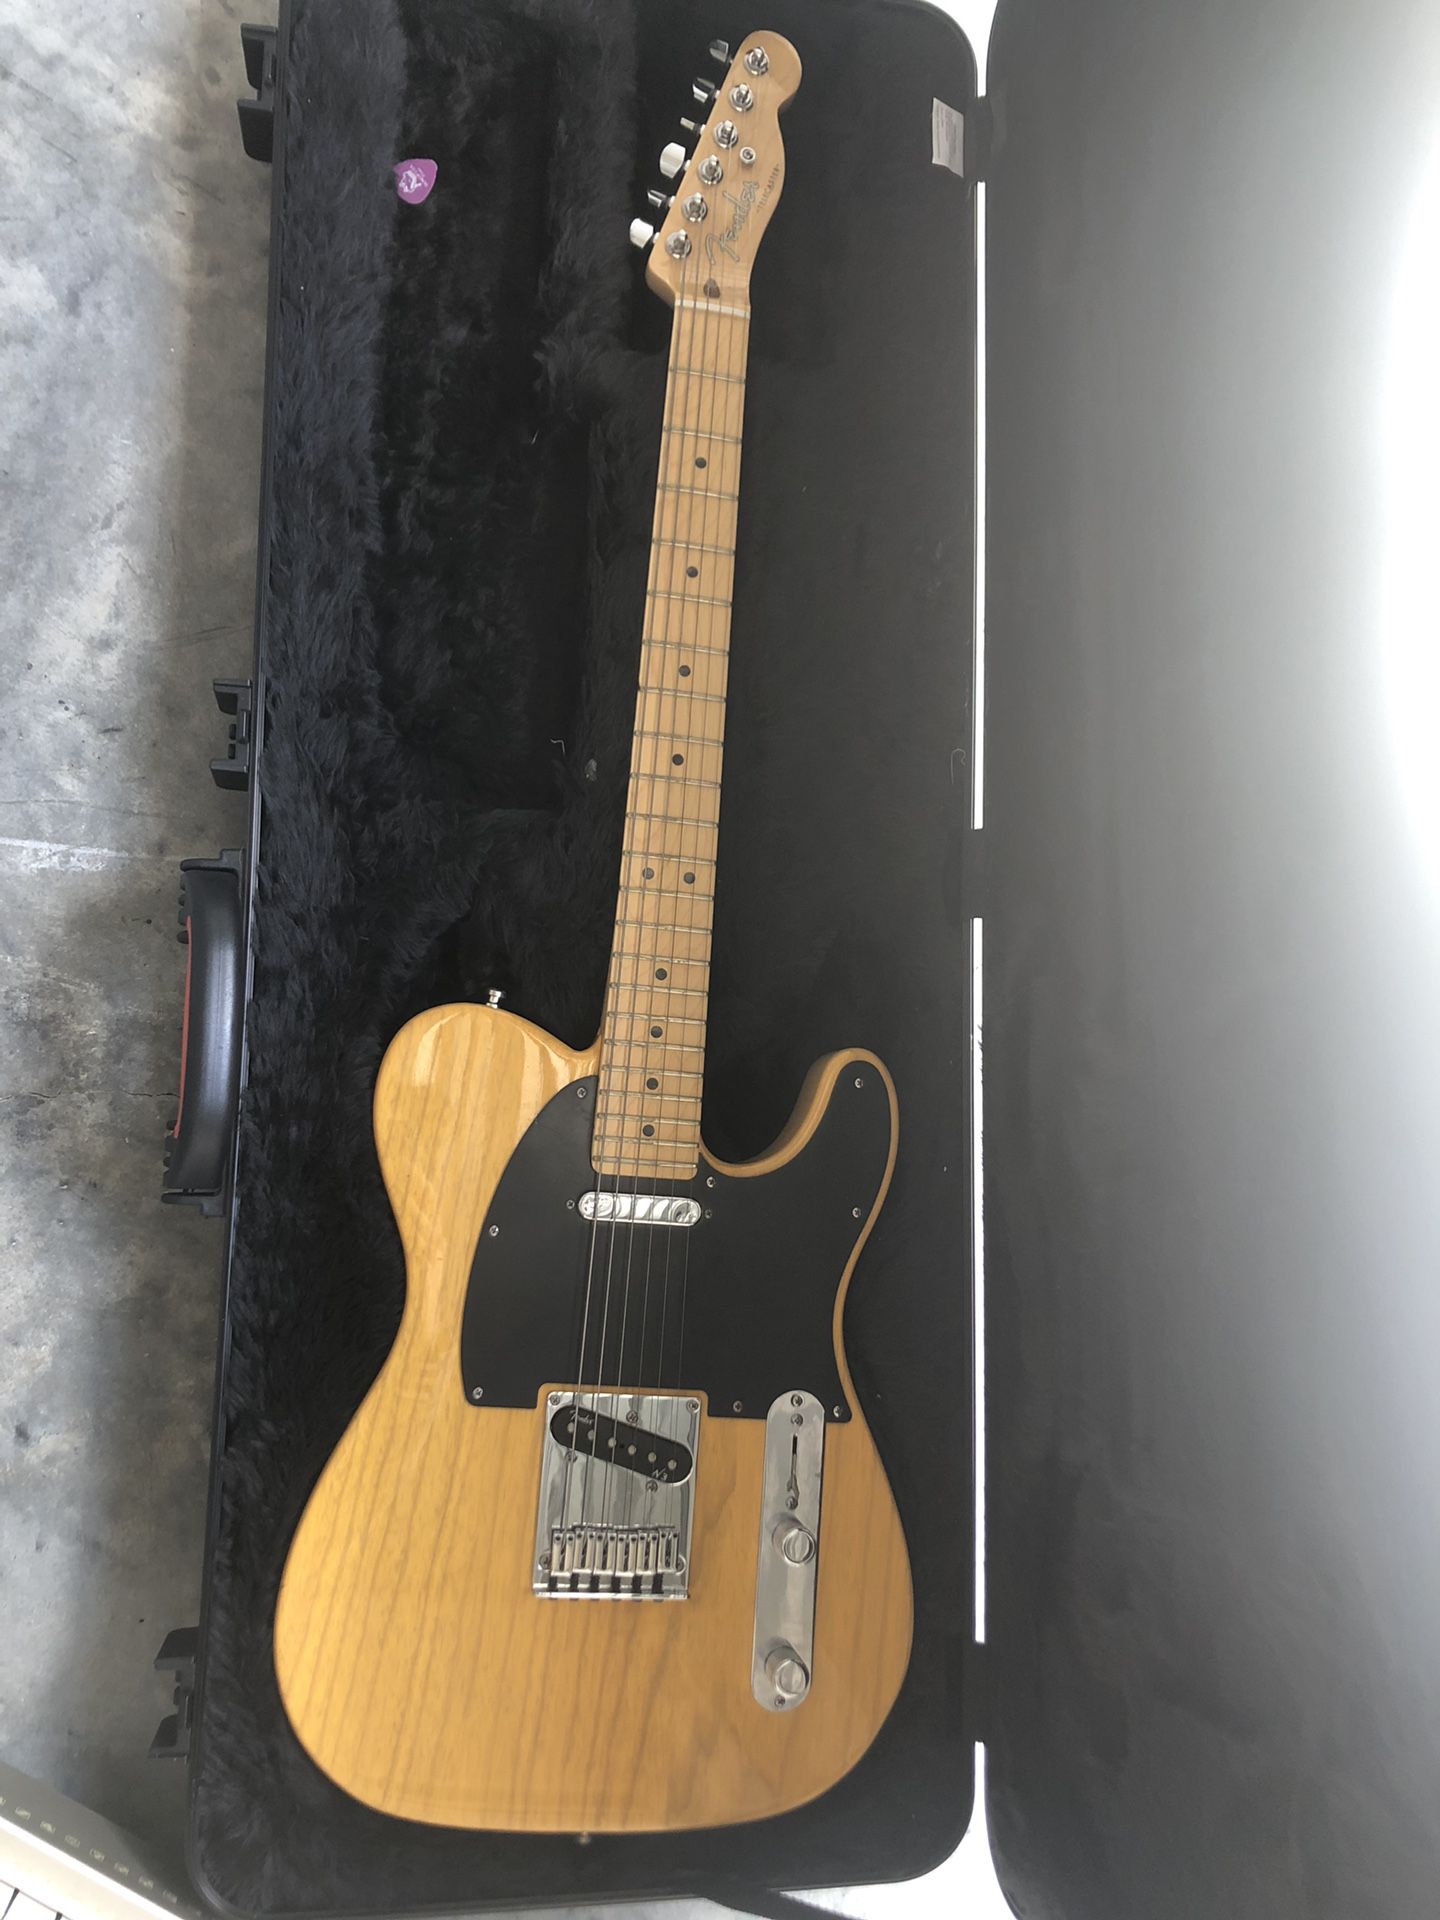 2015 American Fender Telecaster Deluxe Butterscotch Blonde